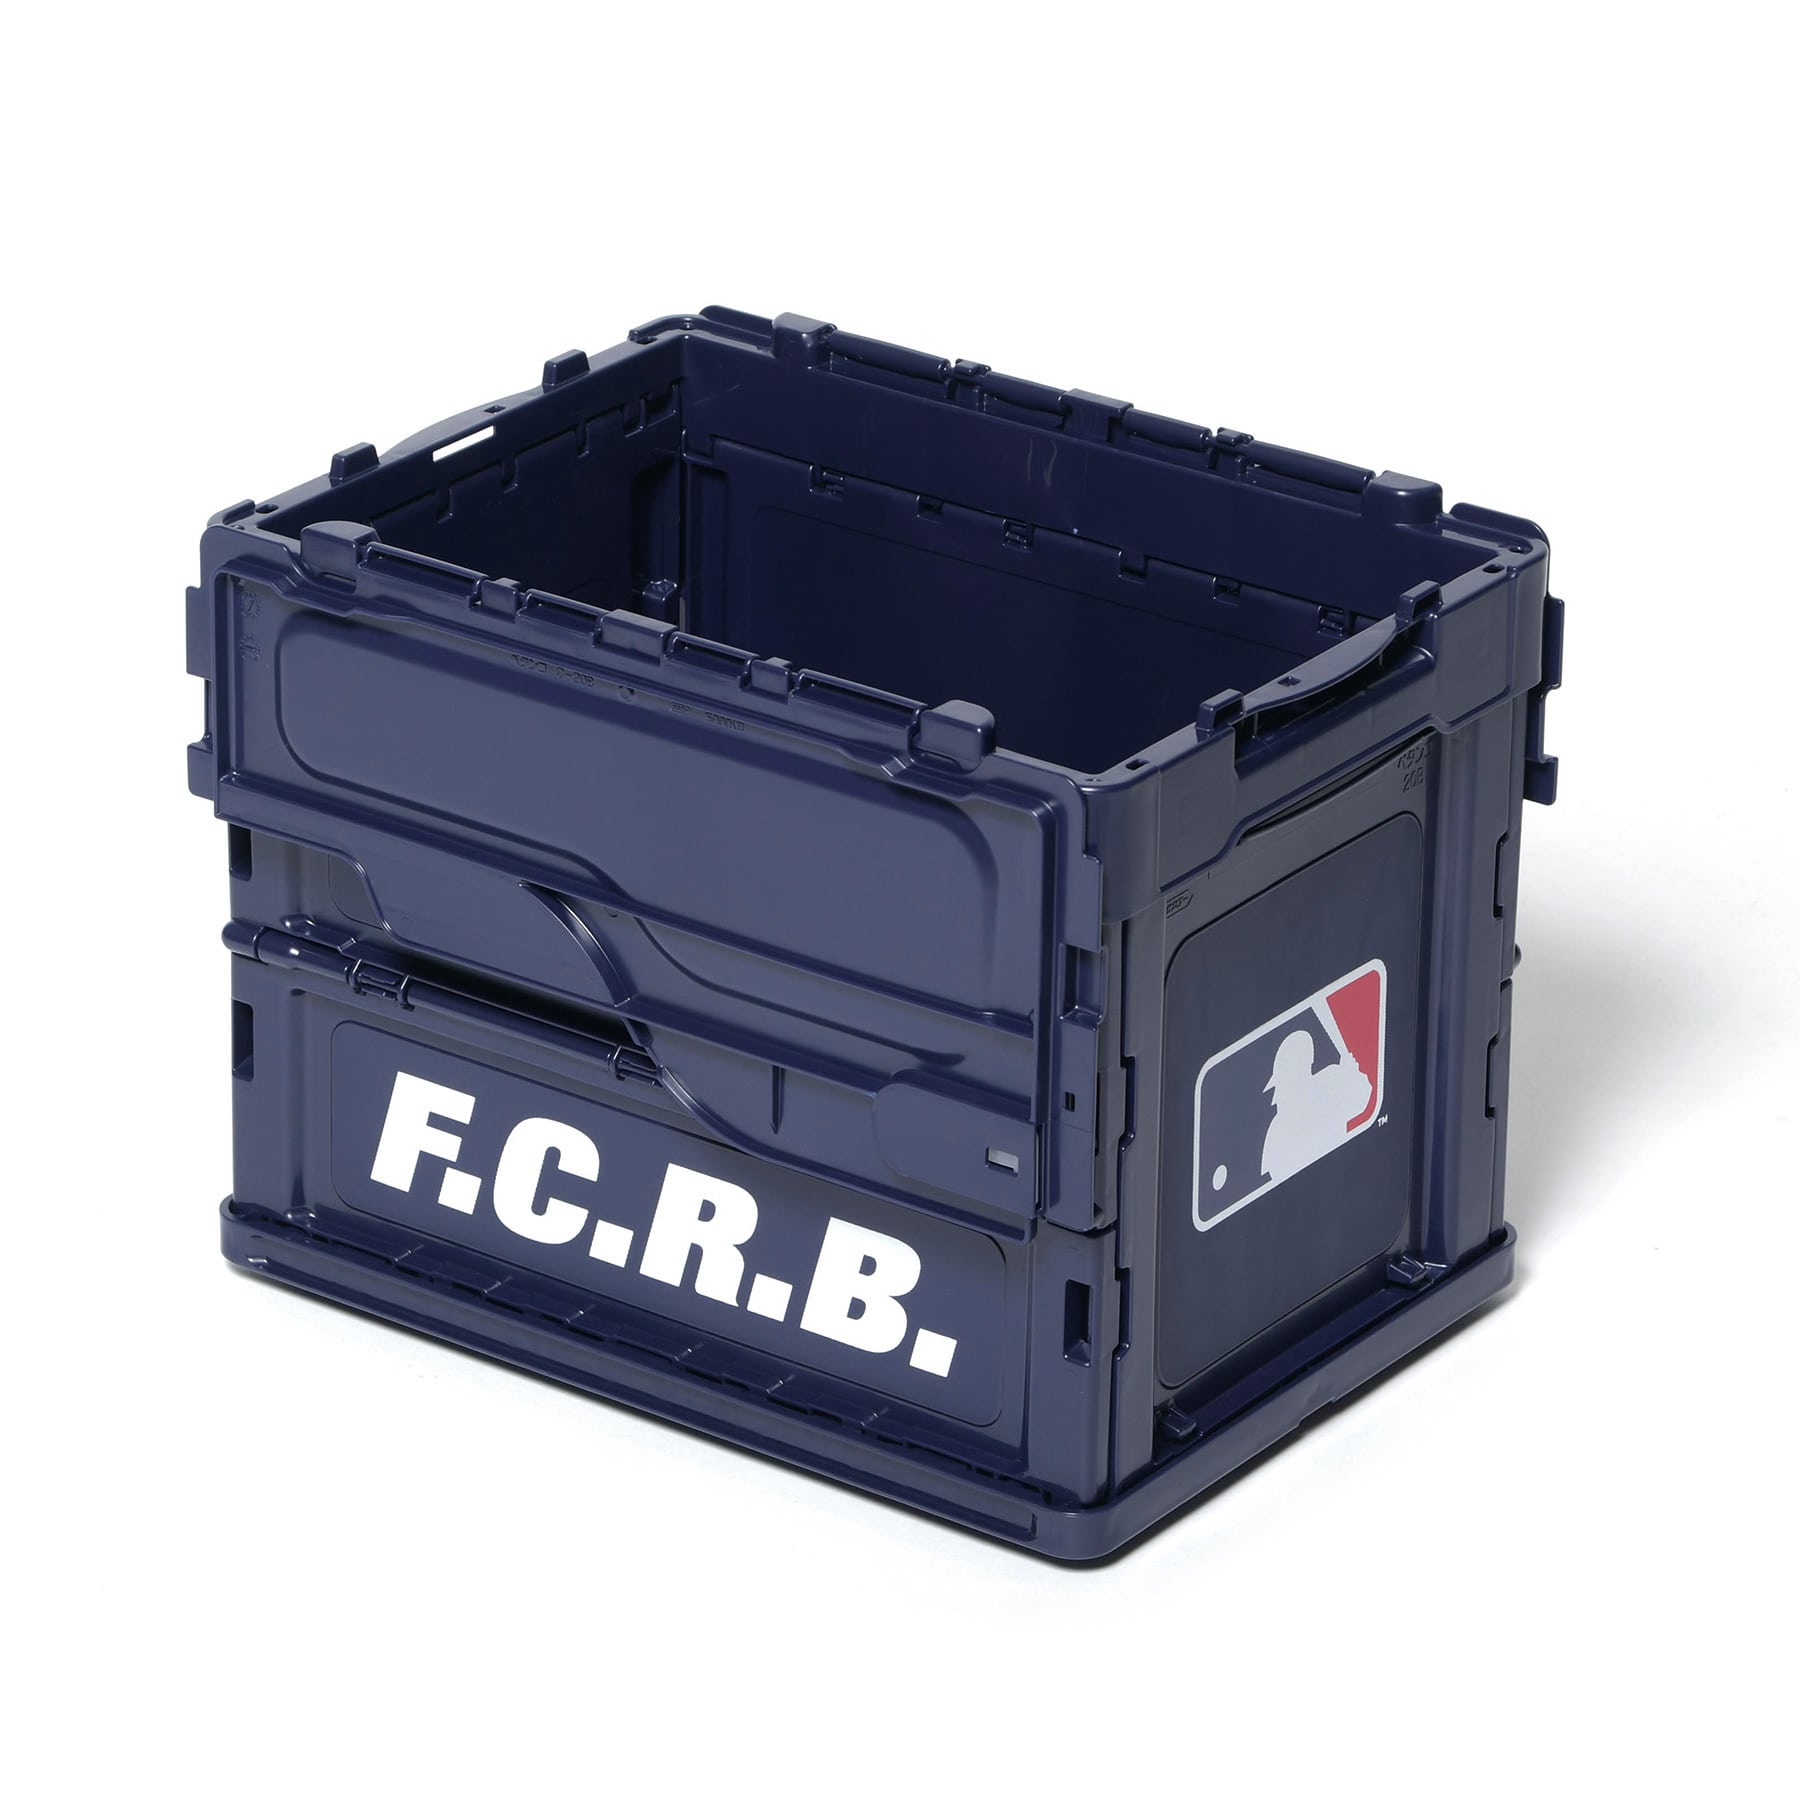 MLB TOUR SMALL FOLDABLE CONTAINER F.C.Real Bristol